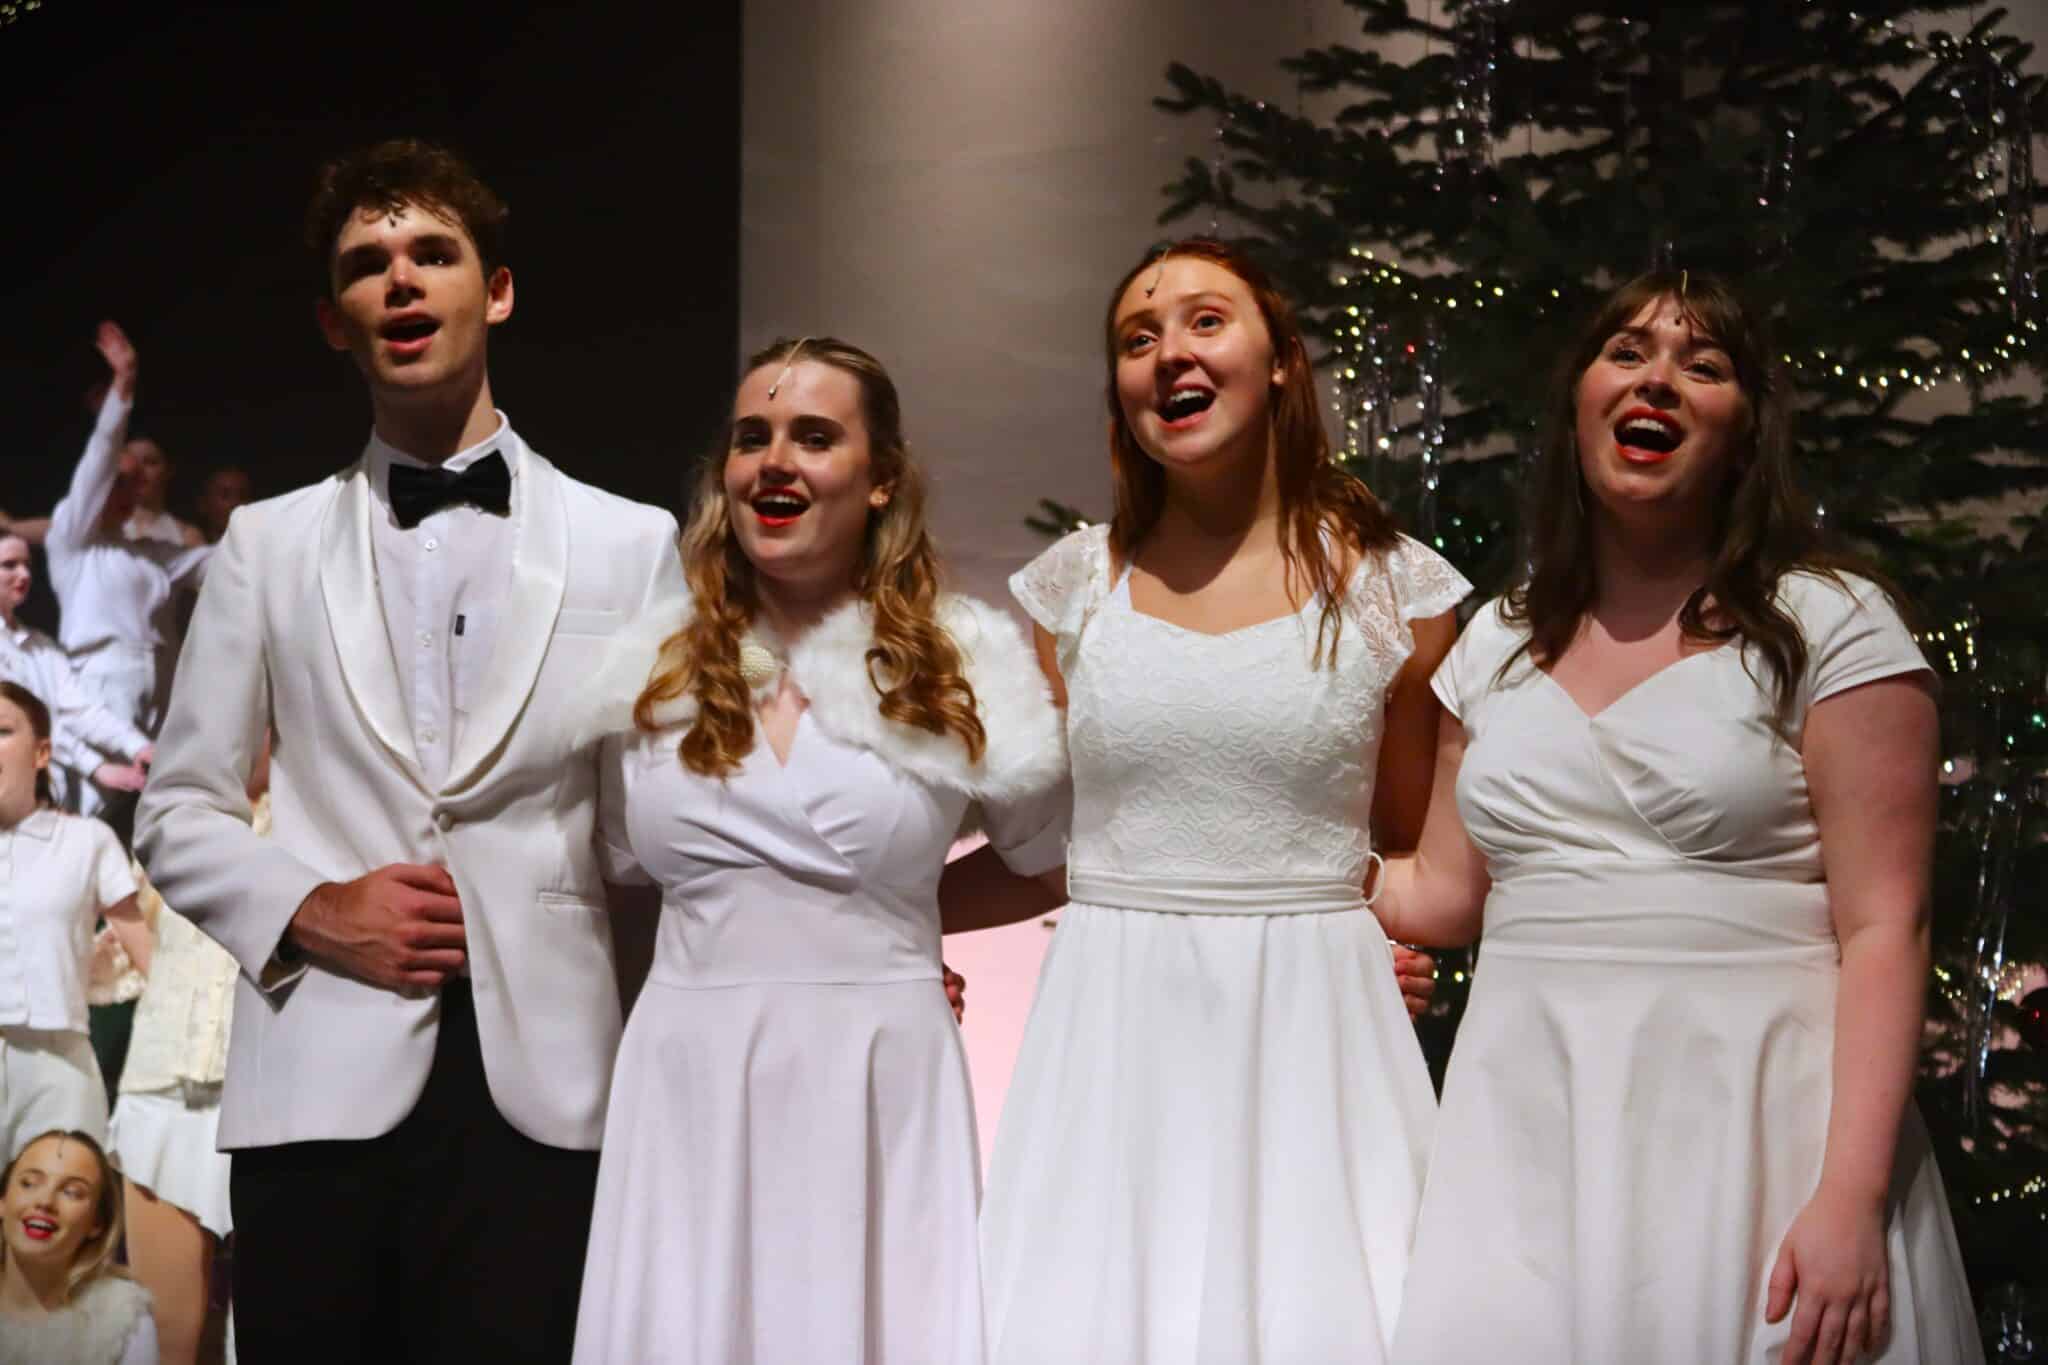 College Christmas variety show a huge hit - singing